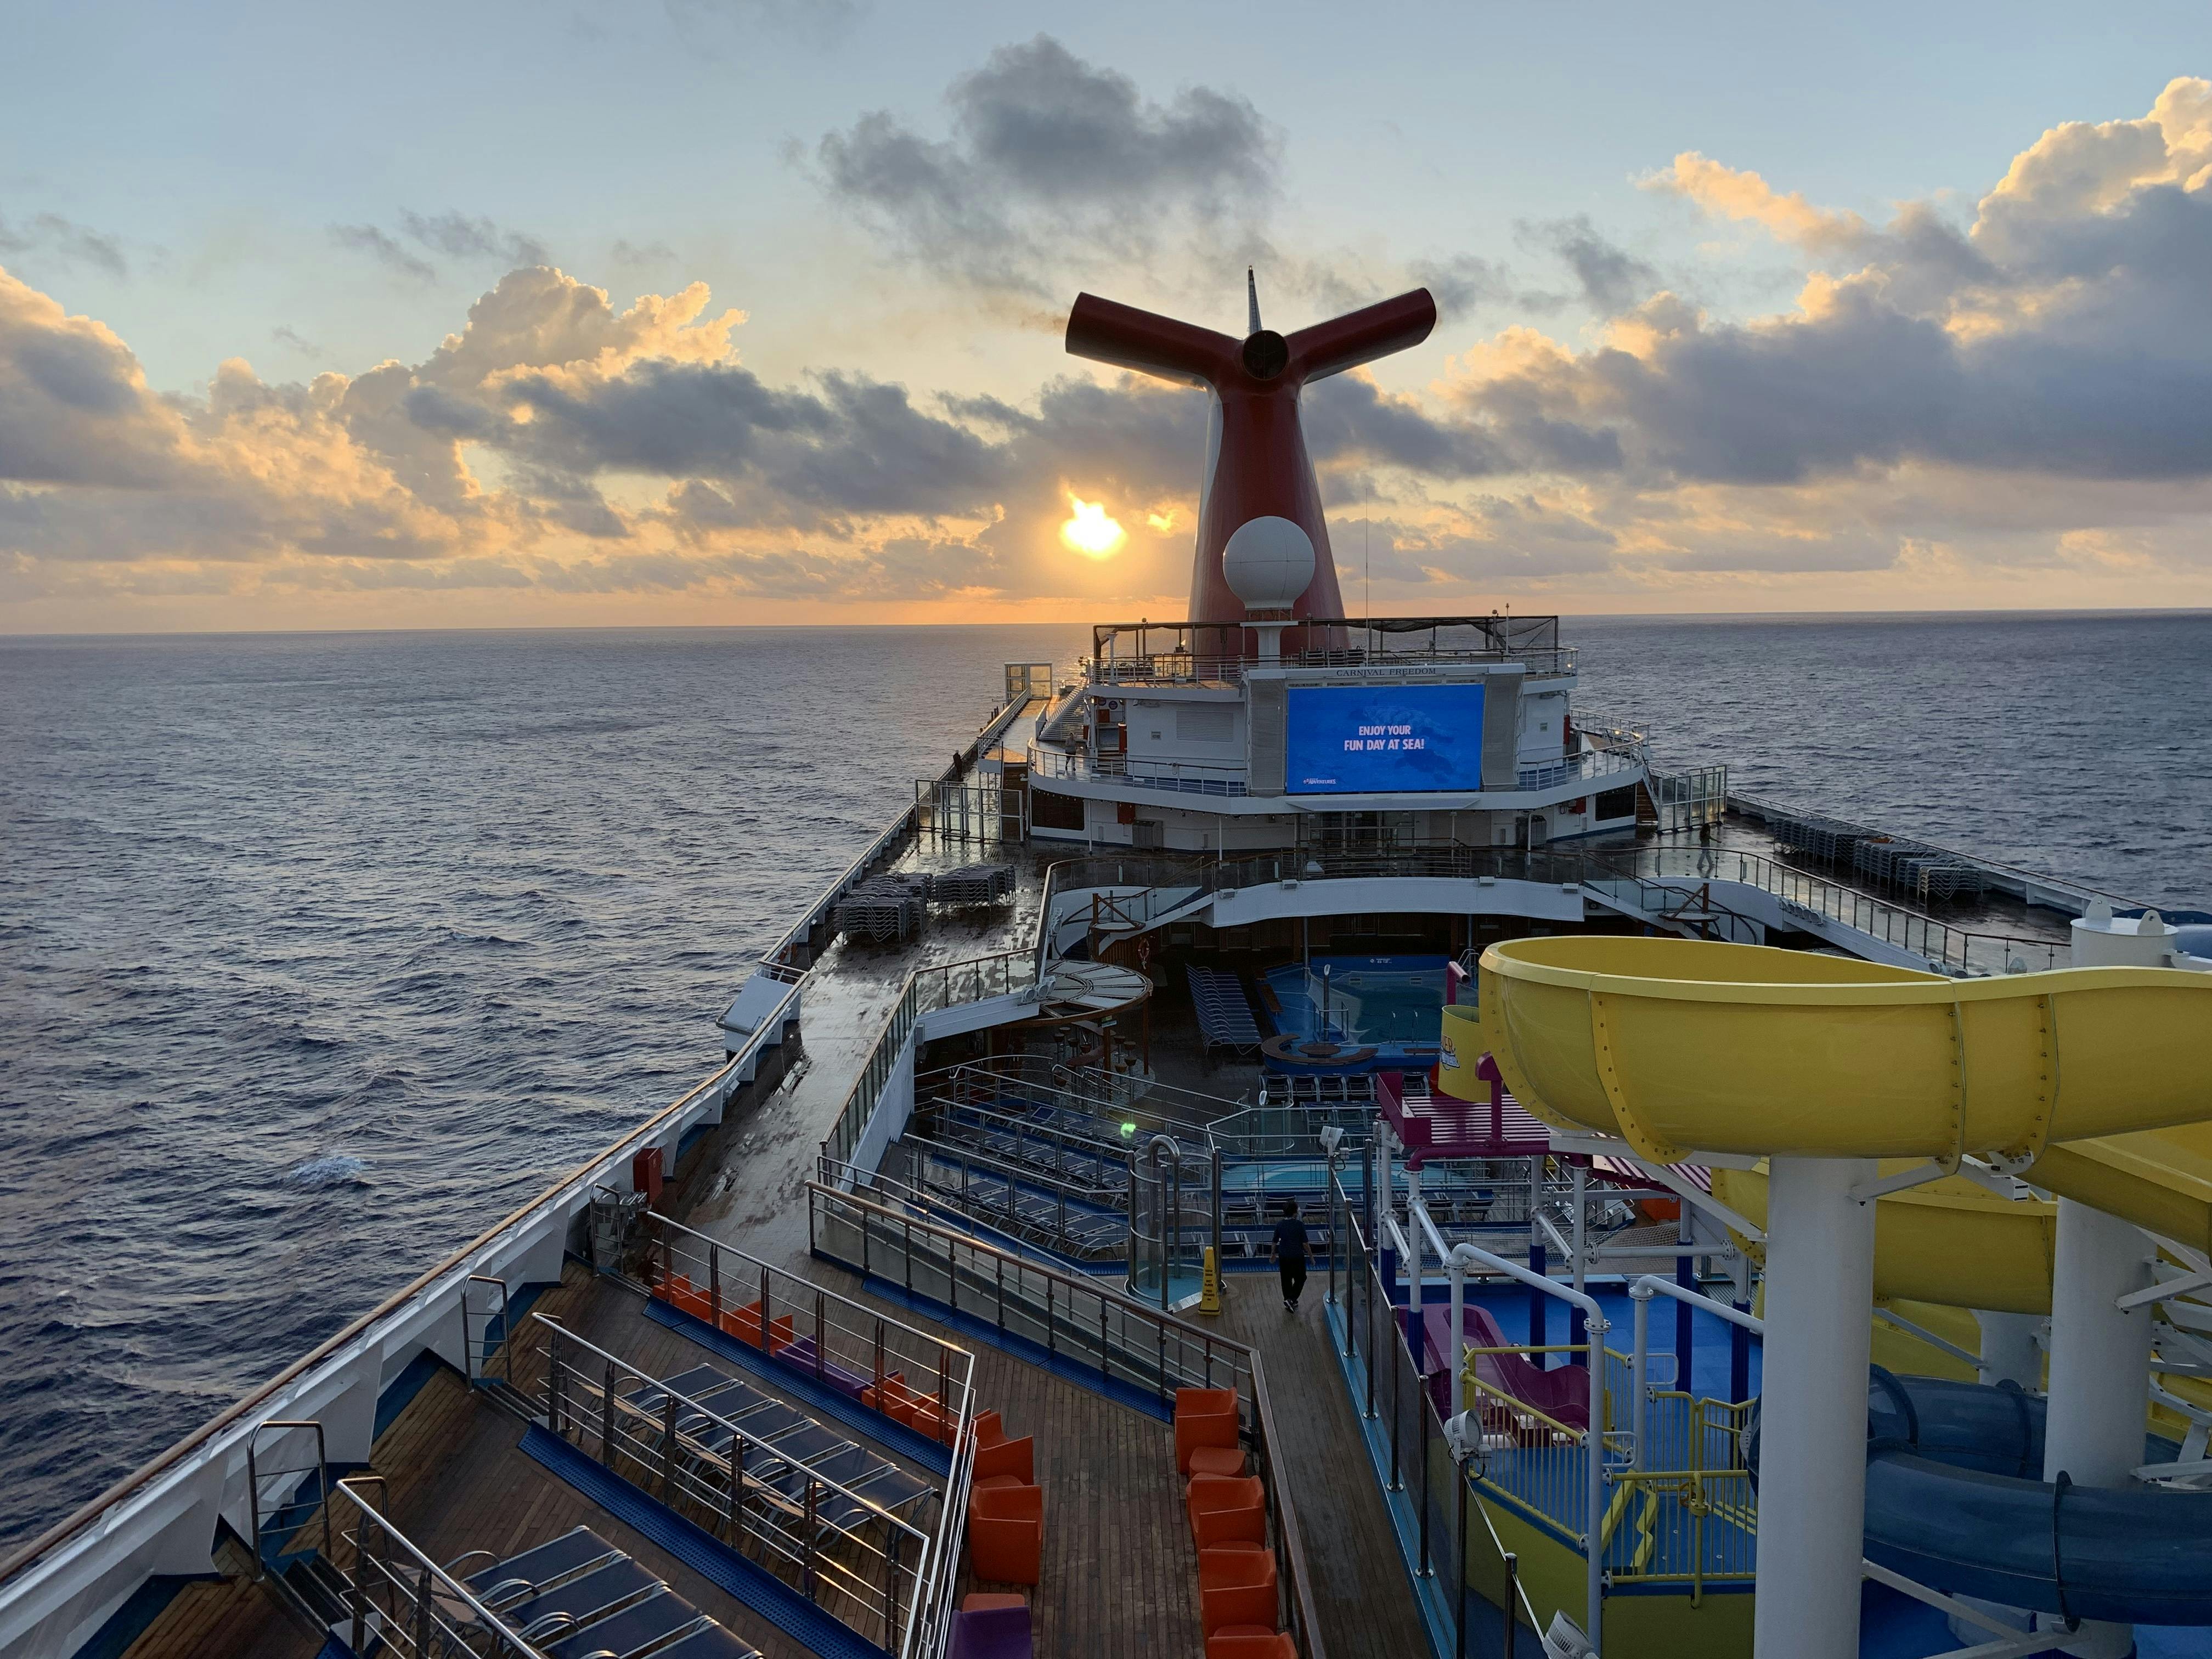 Carnival Freedom Cruise Review by BobbyPatton May 25, 2019